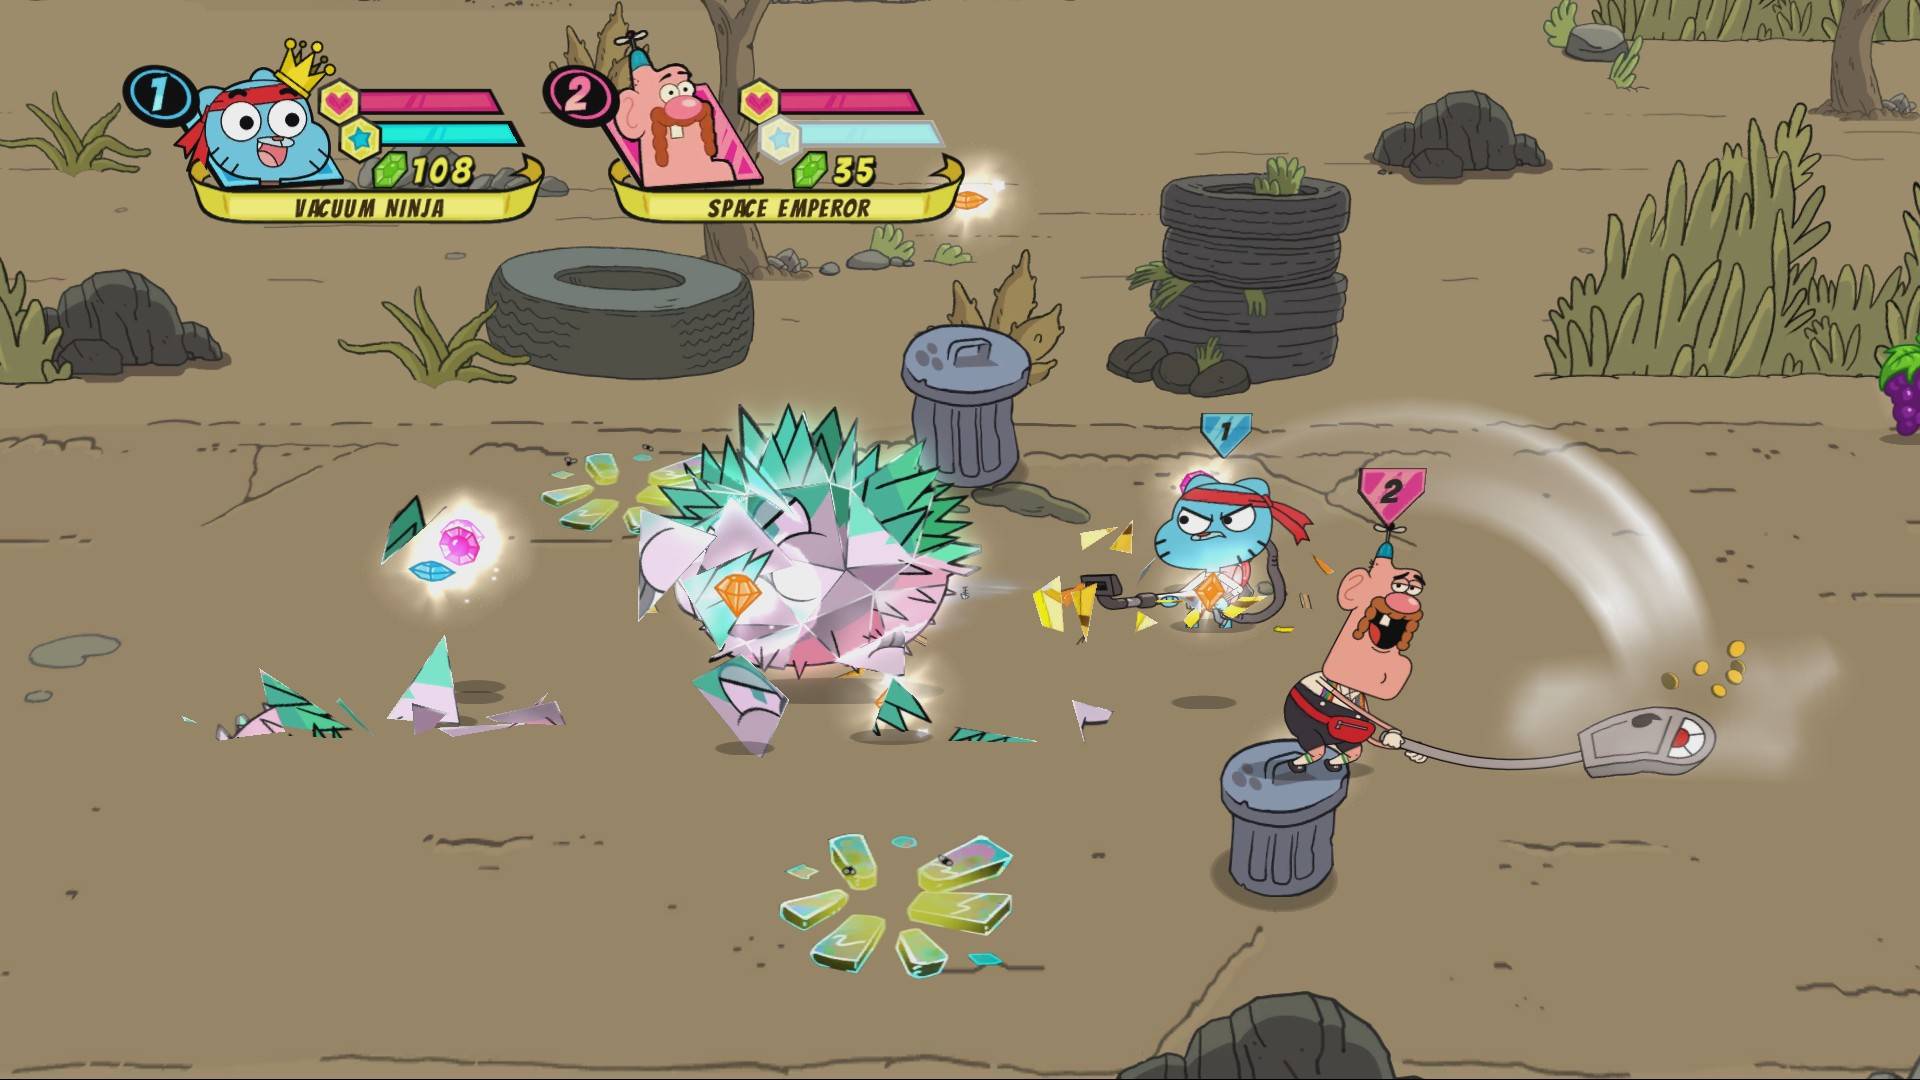 best cartoon network games: several characters from cartoon network beat up goons 